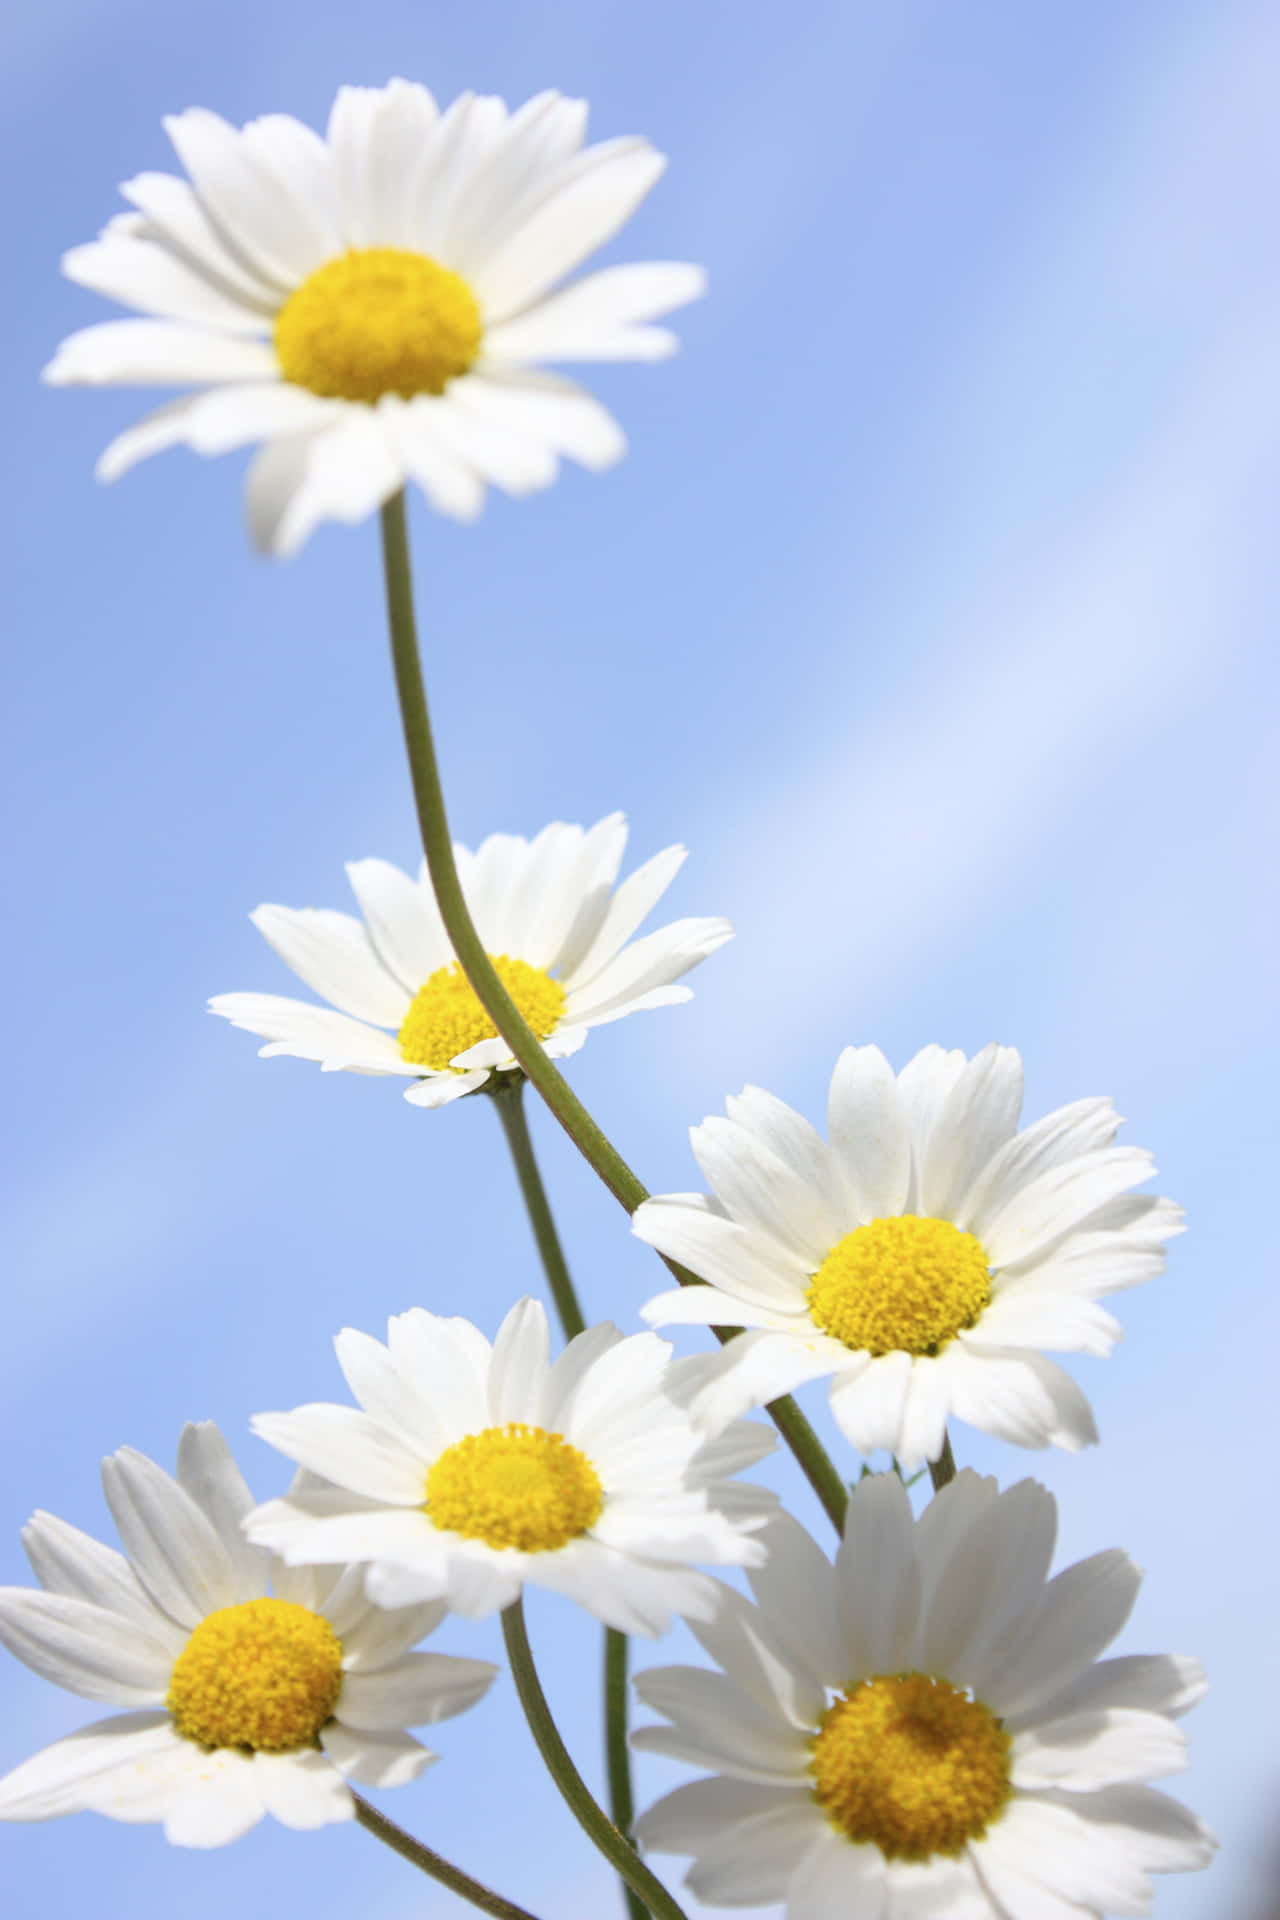 The Natural Beauty of a Daisy